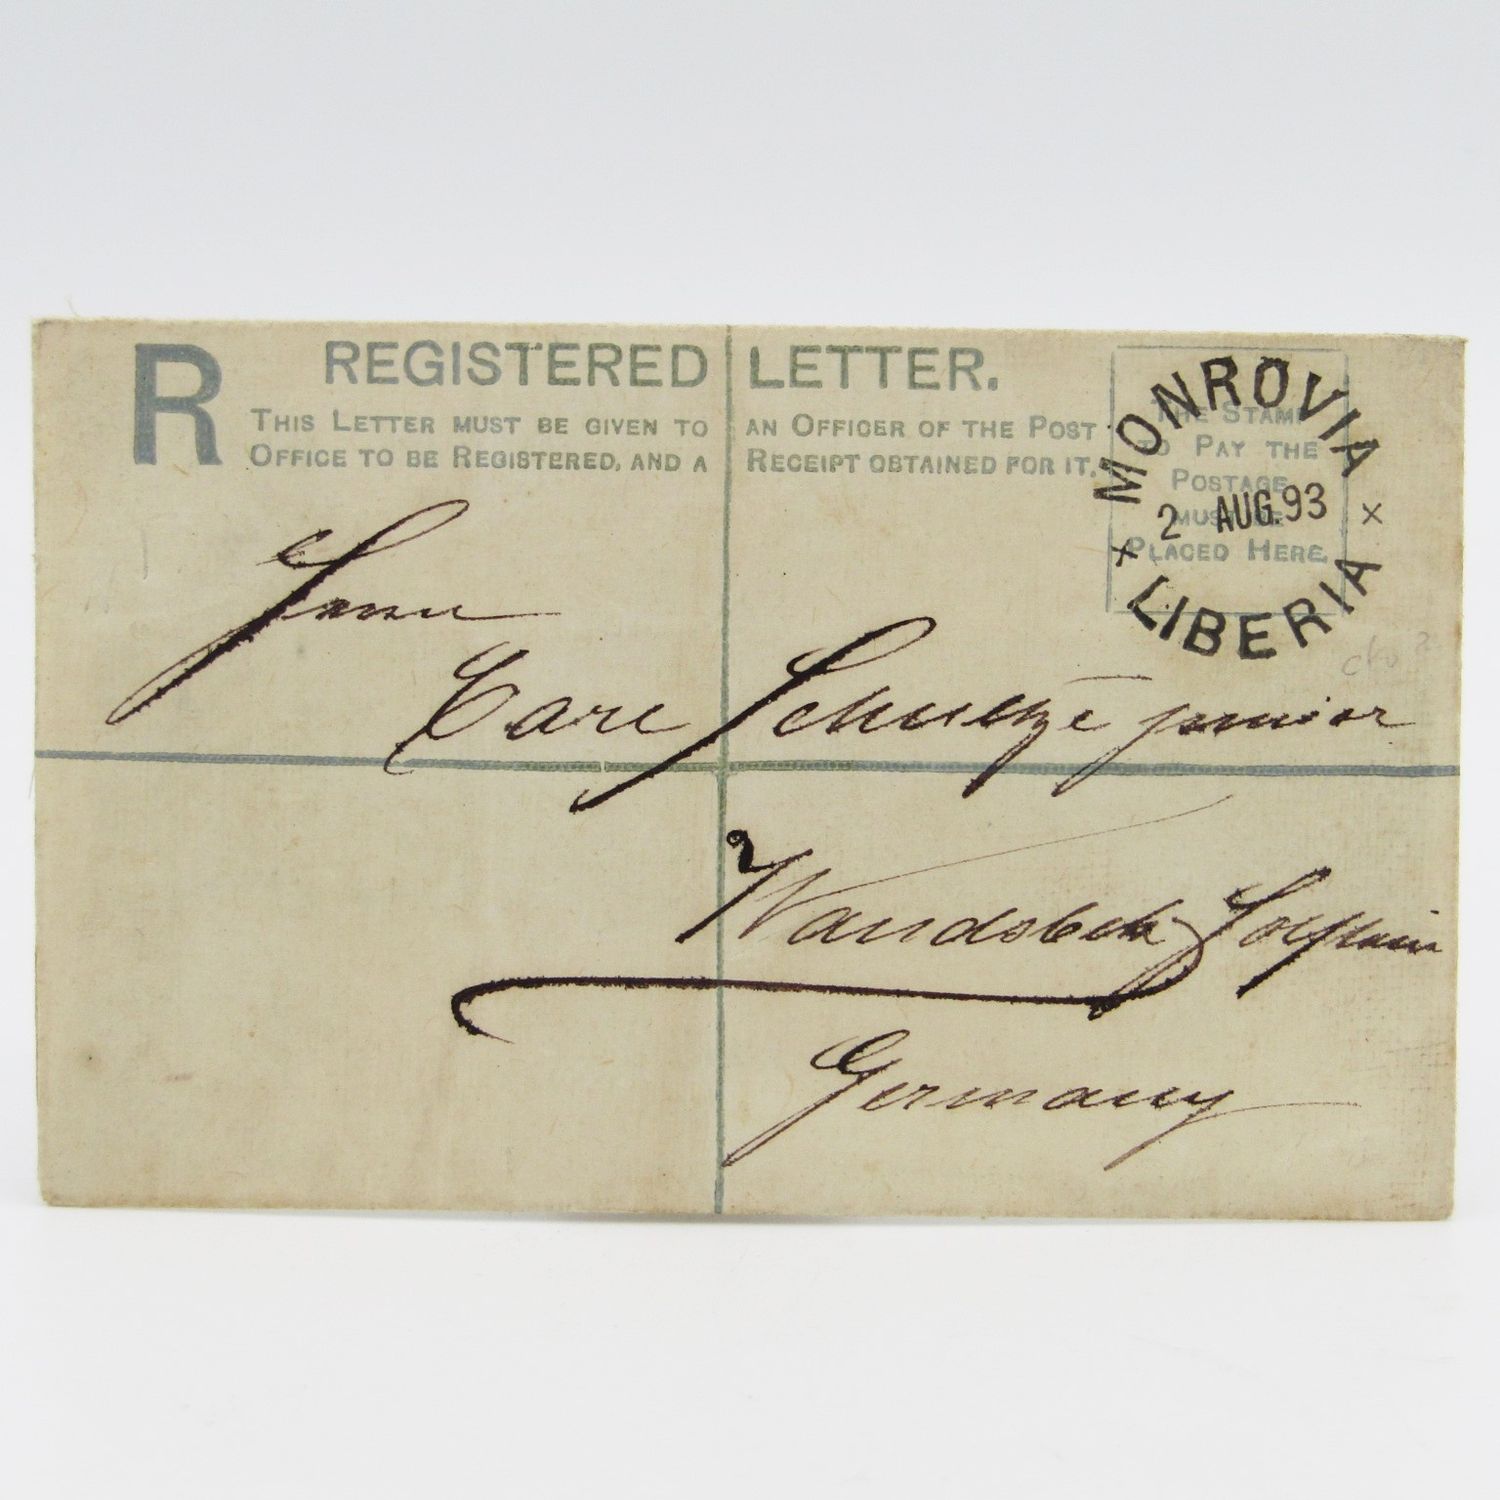 Registered letter from Monrovia , Liberia with 10 cents registration printing on the back - Posted 2 August 1893 to Germany